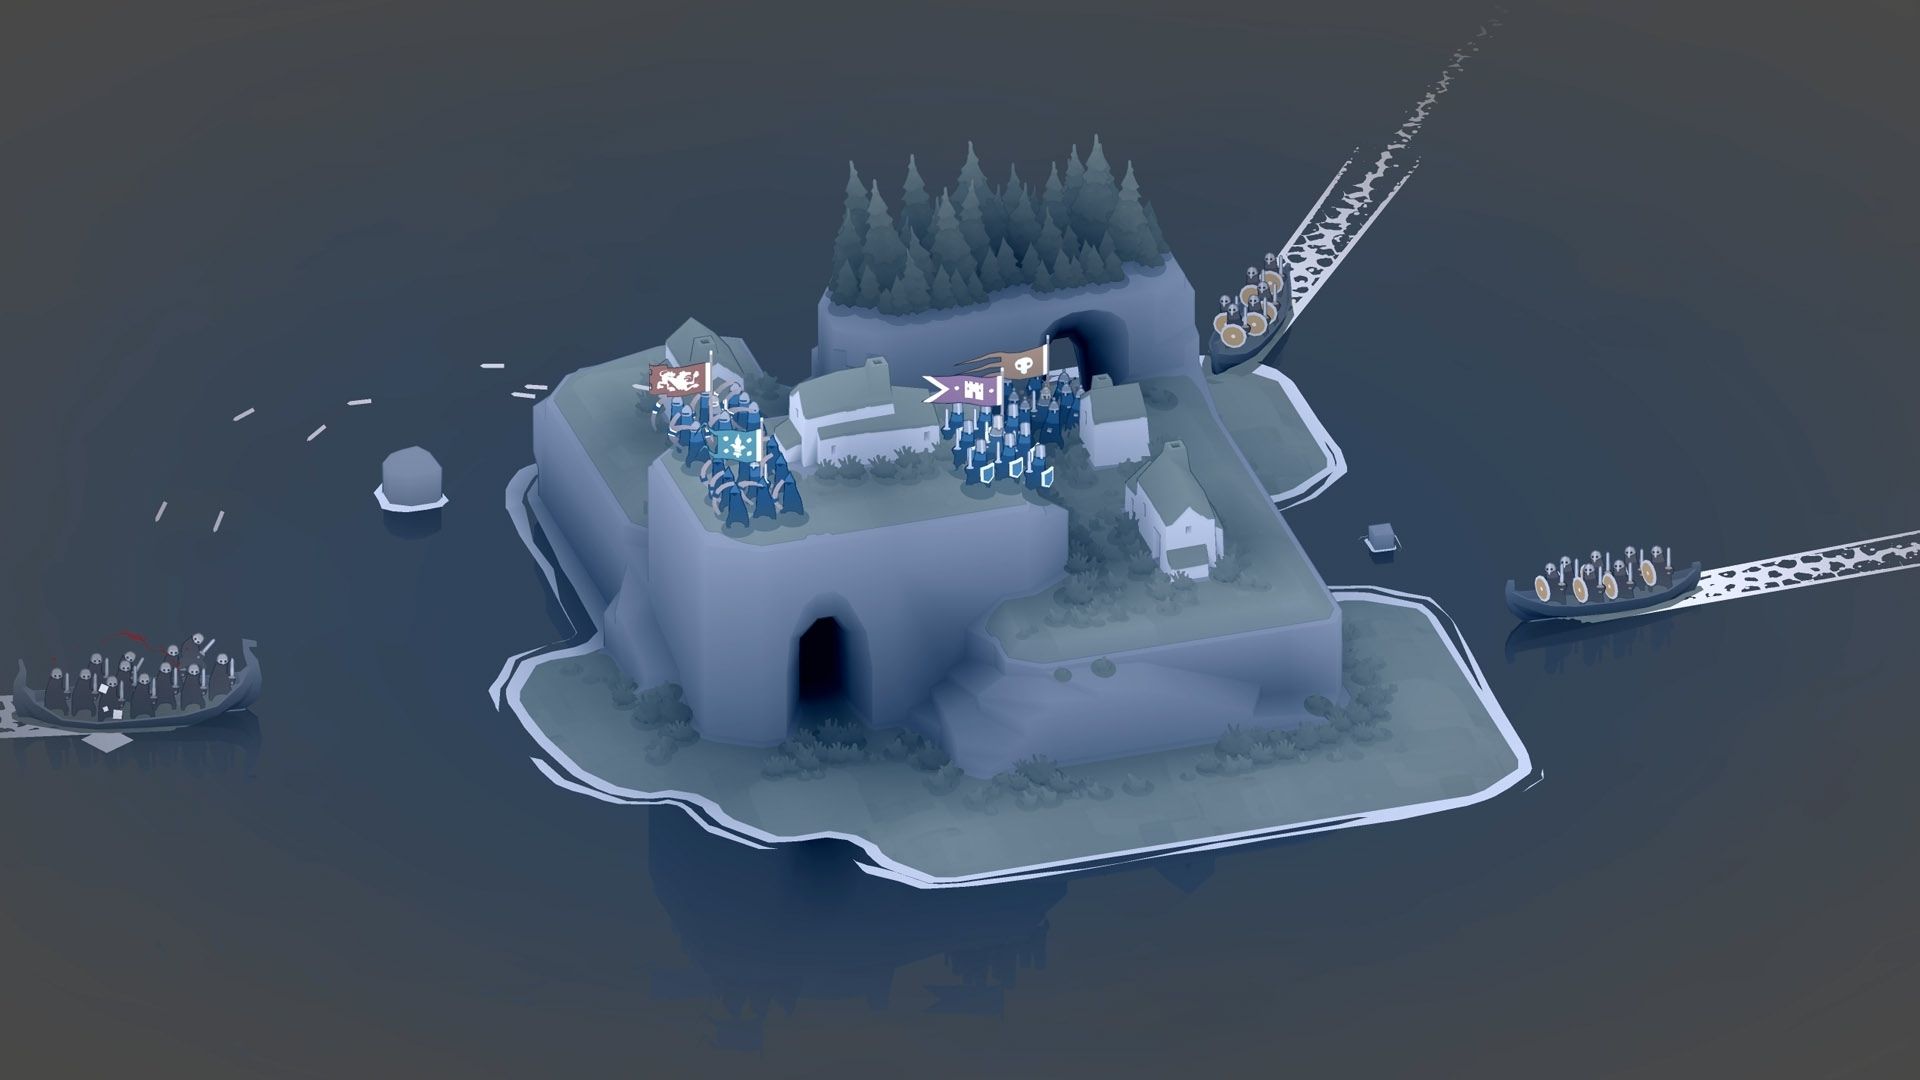 A screenshot from Bad North, showing an island being invaded by vikings.